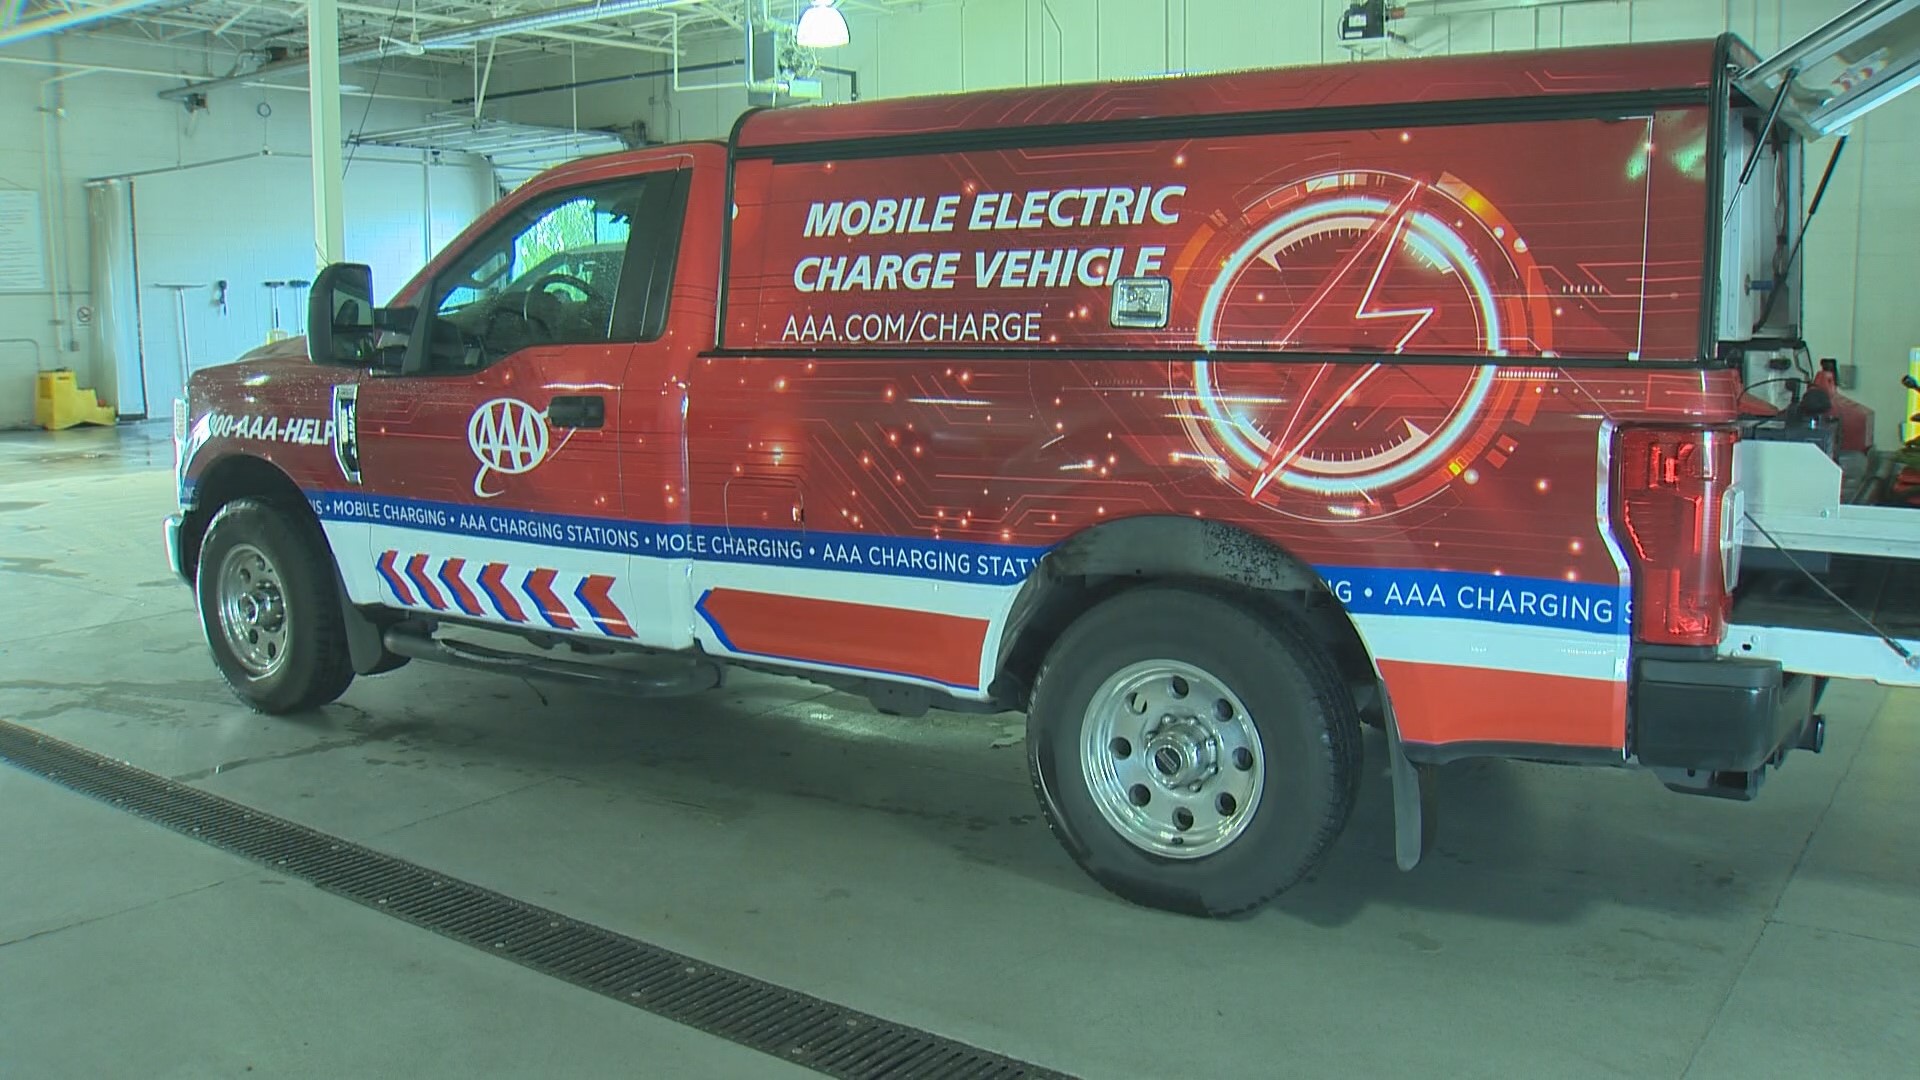 Triple-A offers mobile vehicle charging as part of their roadside assistance plan. The process will soon go greener as they aim for a zero-emission roadside charge.